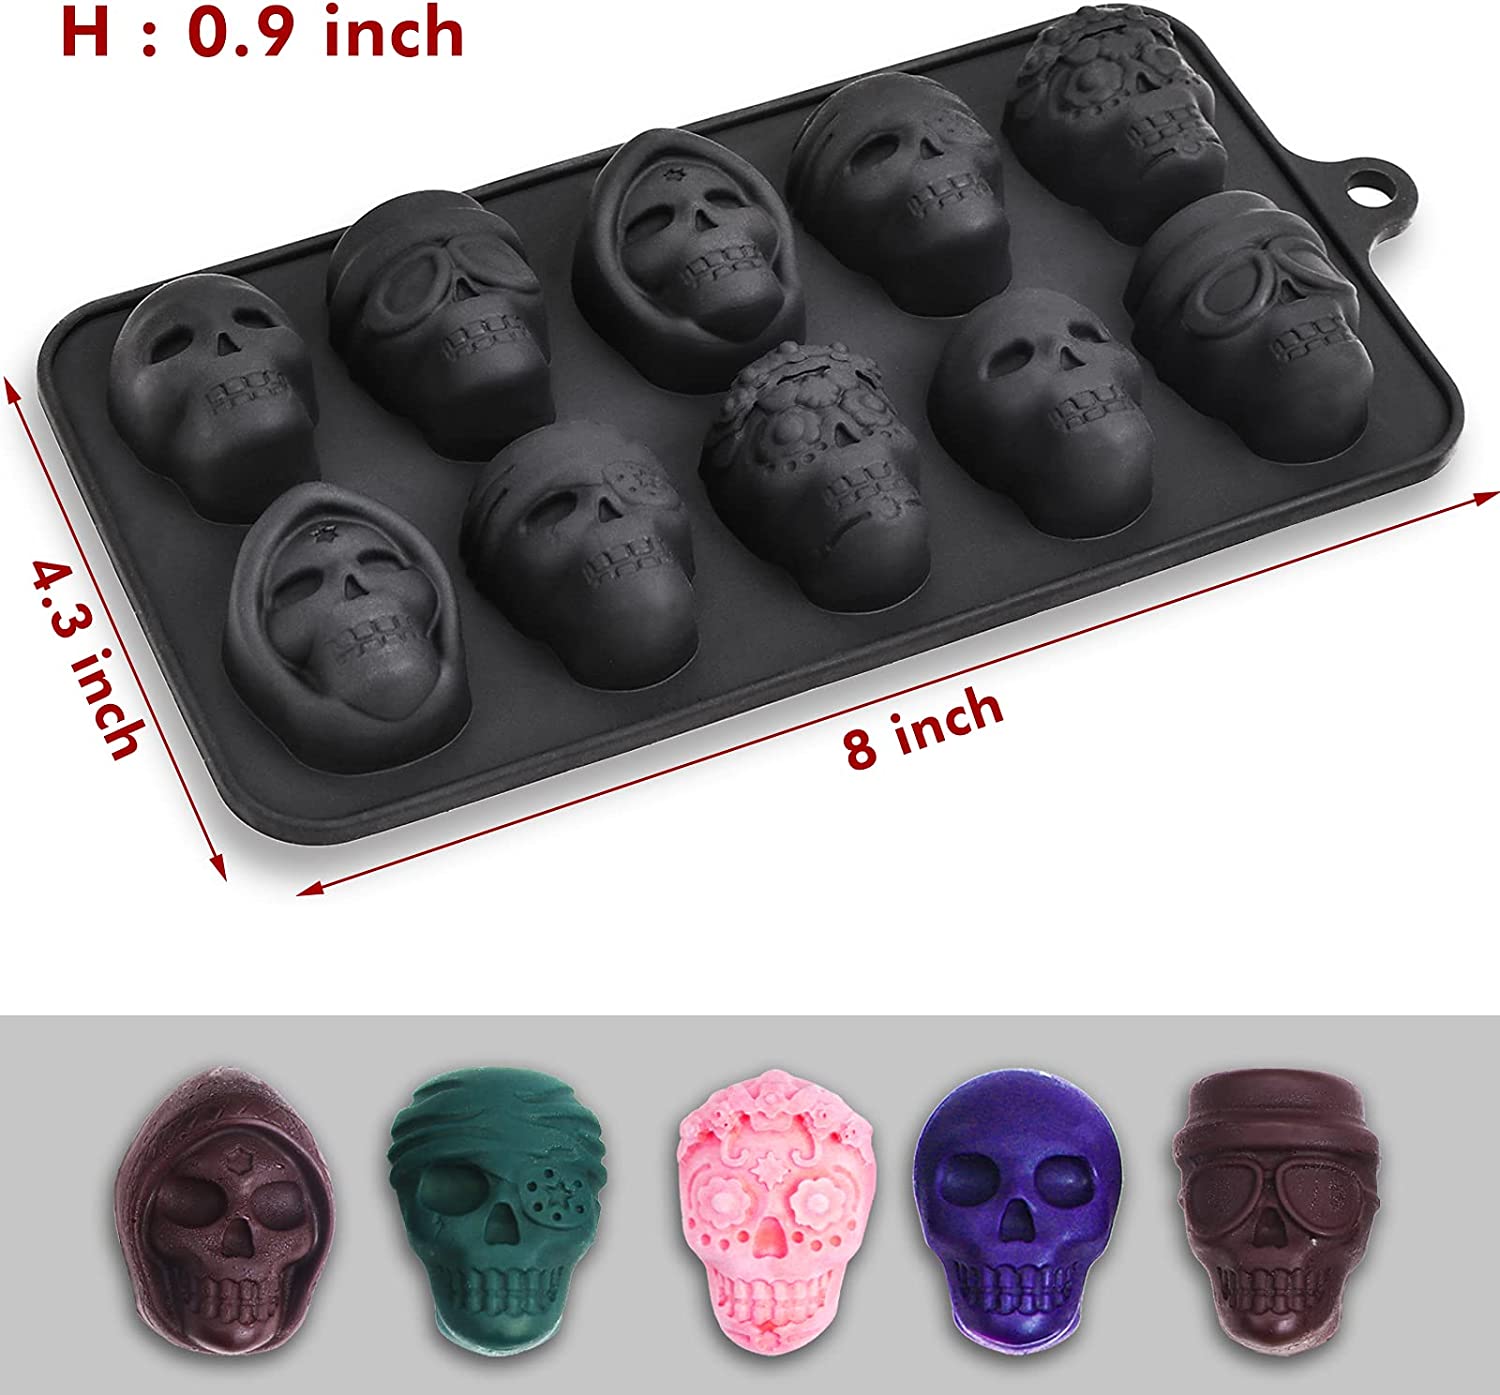 SEIHDHIK Skull Silicone Mold 2 Packs Halloween Chocolate Molds Silicone  Non-stick Skull Candy Mold for Jello Cake Ice Cube Crayon Soap Halloween  Party